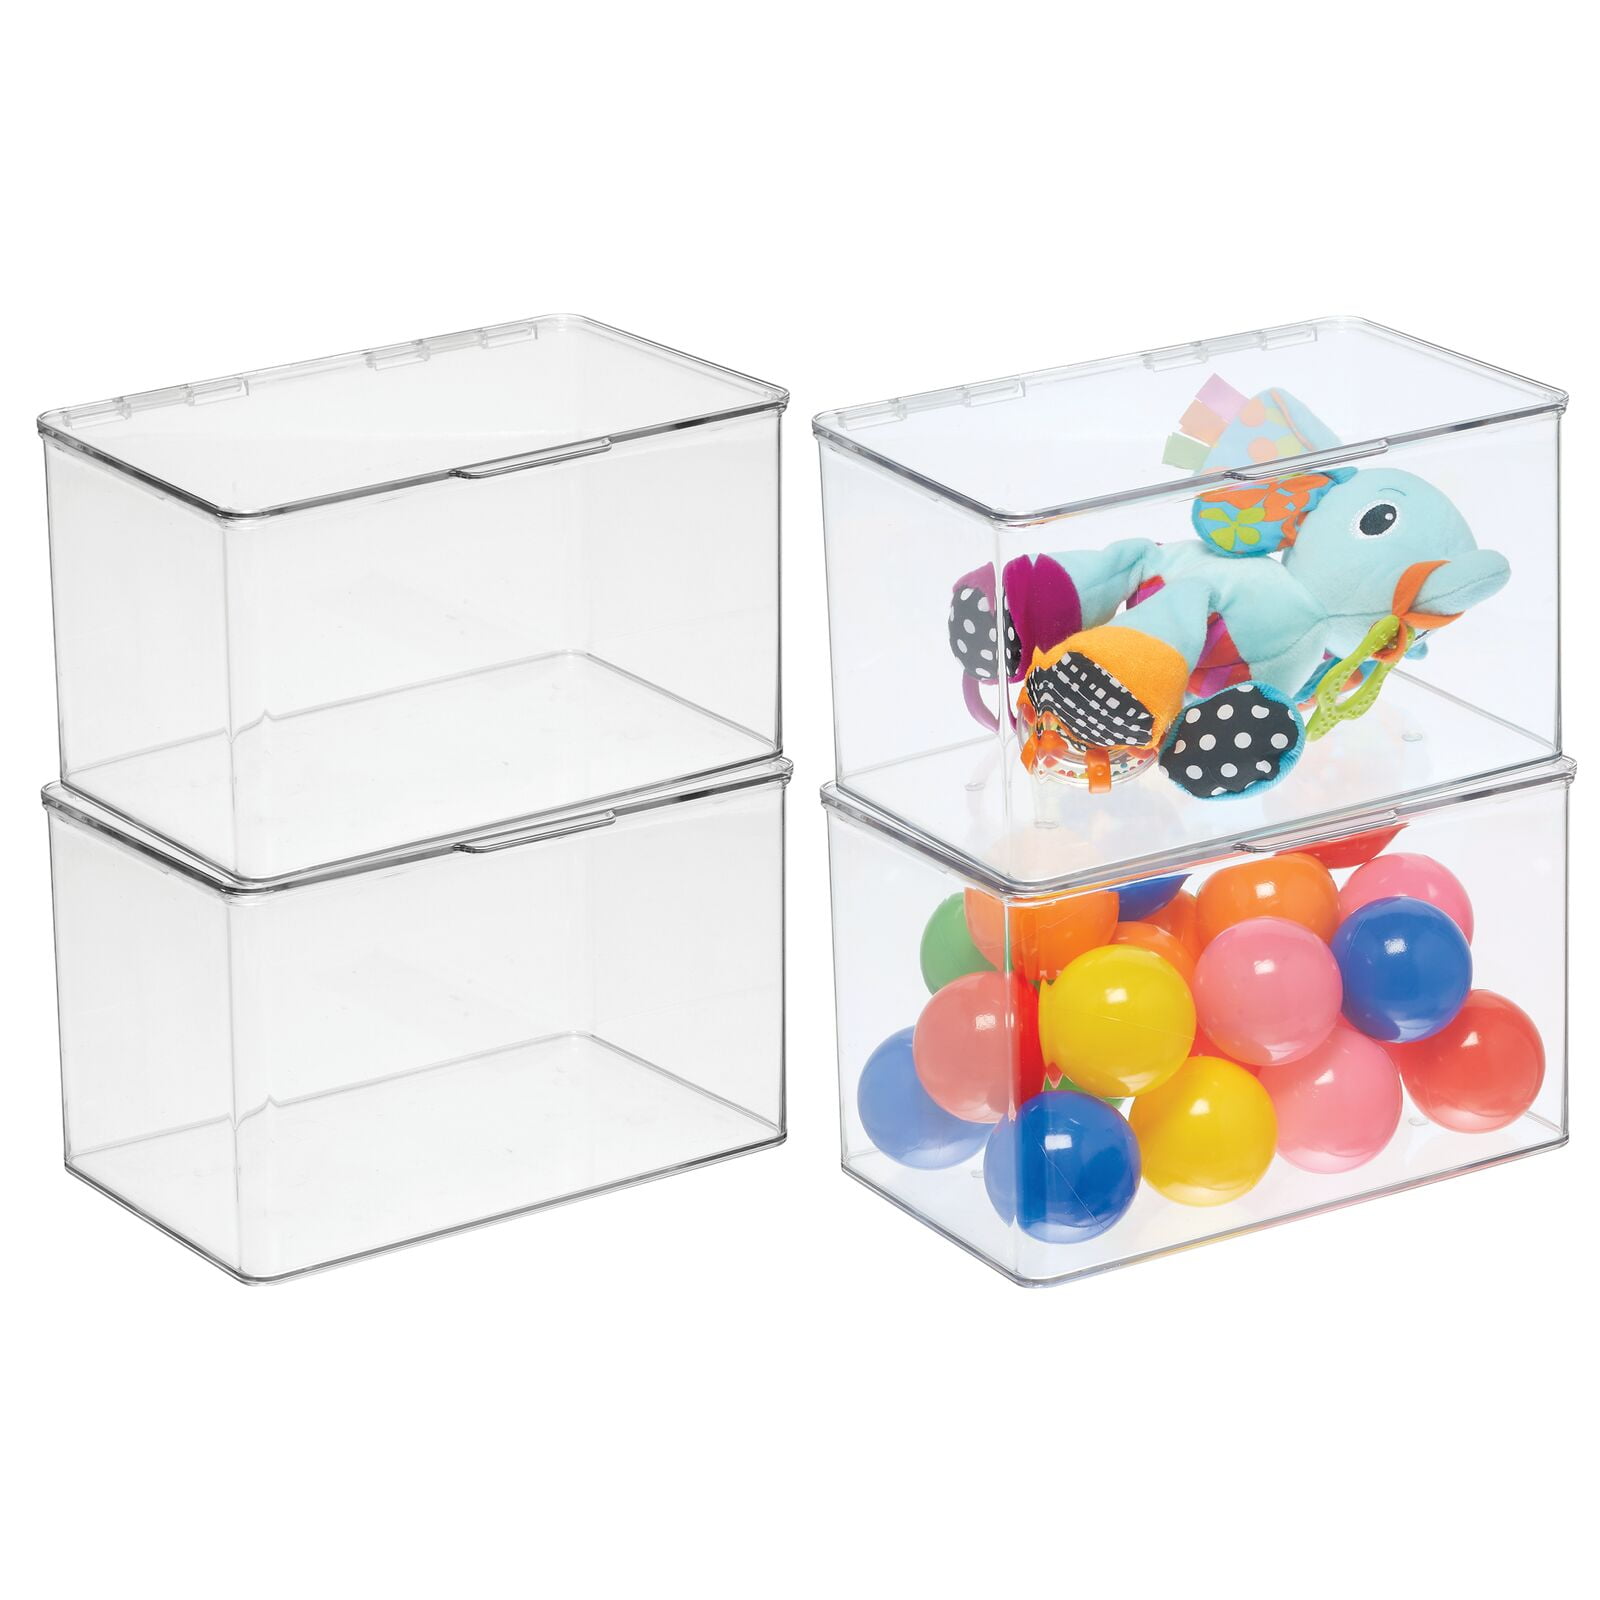 Majestic Ace Brand Clearance! 4 Pack Transparent Acrylic Plastic Square Cube Small Acrylic Box with Lid Storage Box Storage Box for Candy Pills and Small